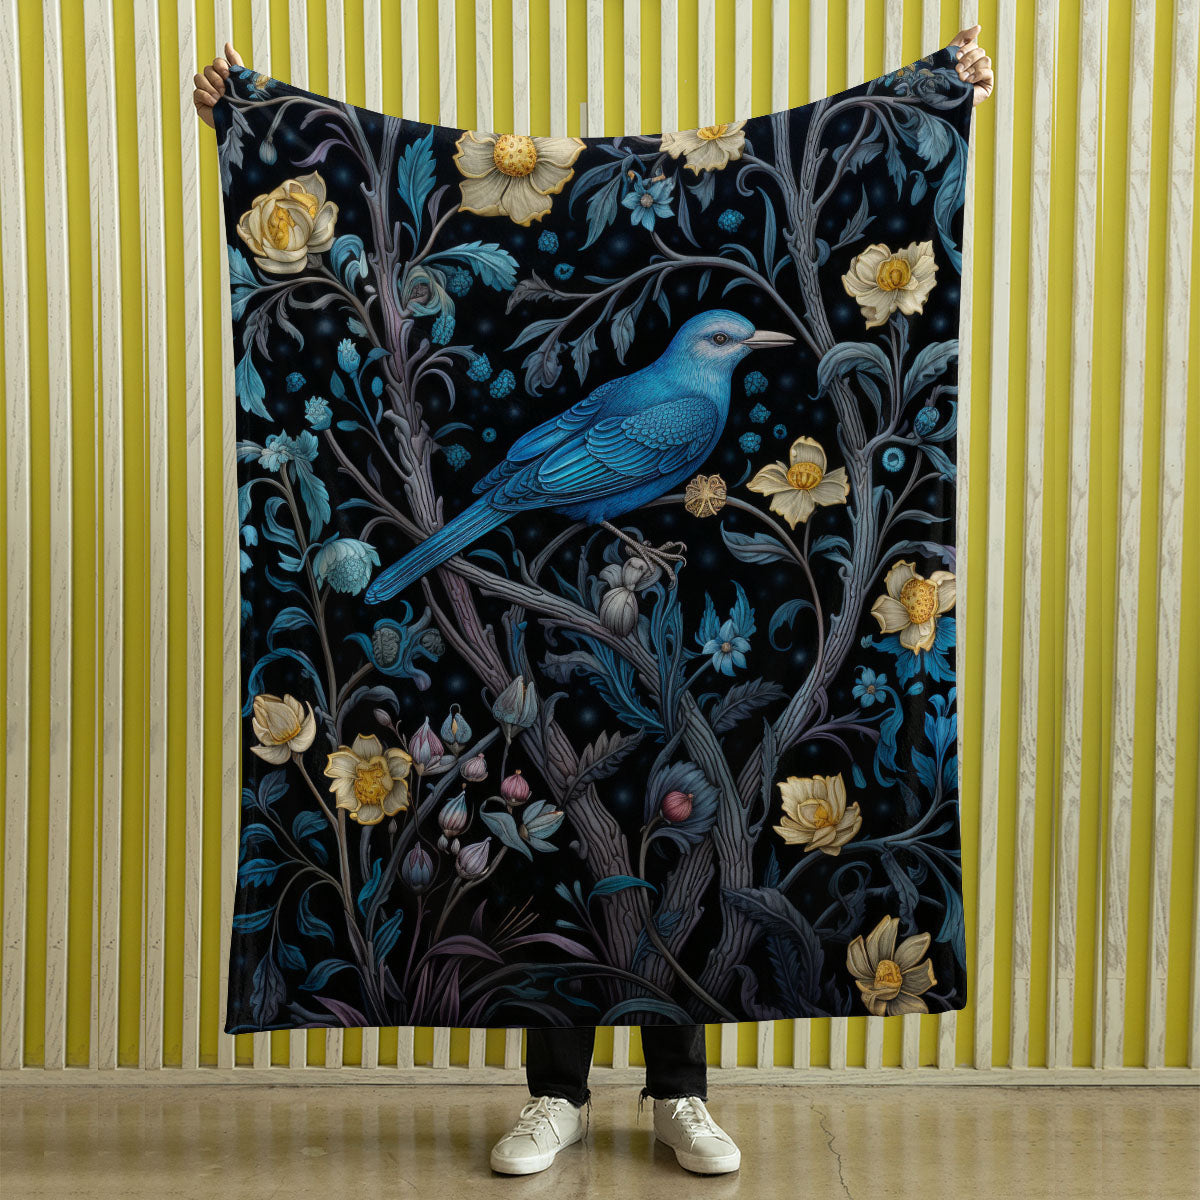 Dark Cottagecore Crow Tapestry Woven | Raven Wall Art Blanket Woven Wall Hanging | Woodland Aesthetic Halloween Gothic Decor Crow Blanket, Bird And Flower 002